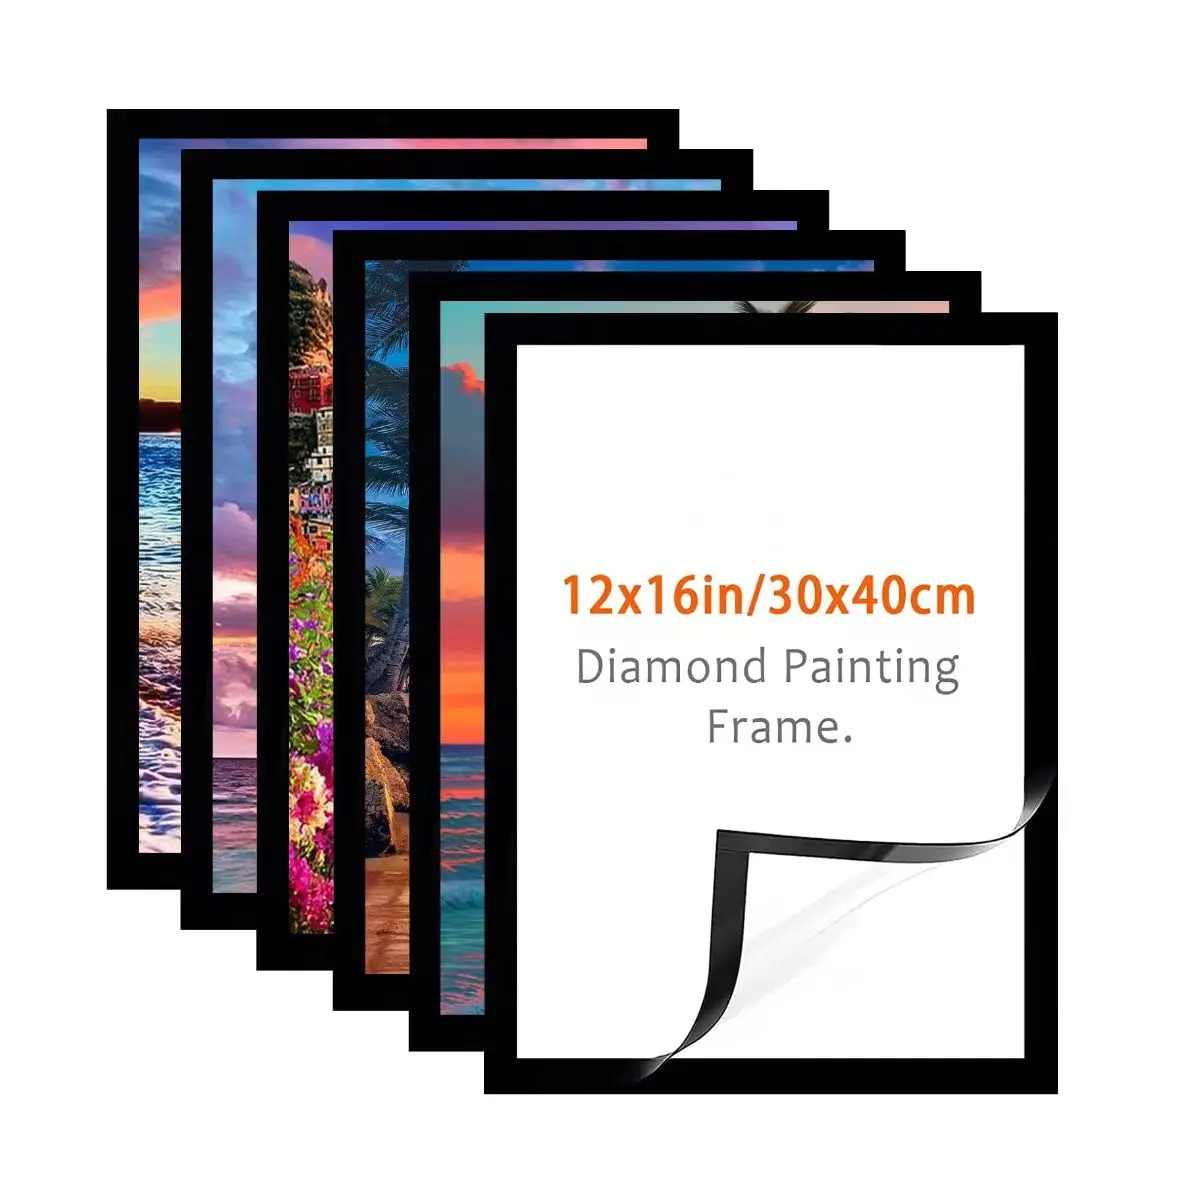 Diamond Painting Frames 30x40 cm - Diamond Art Frame 12x16 inch Suitable for 10x14inch Picture, Diamond Paintings Frames Magnetic Self-Adhesive